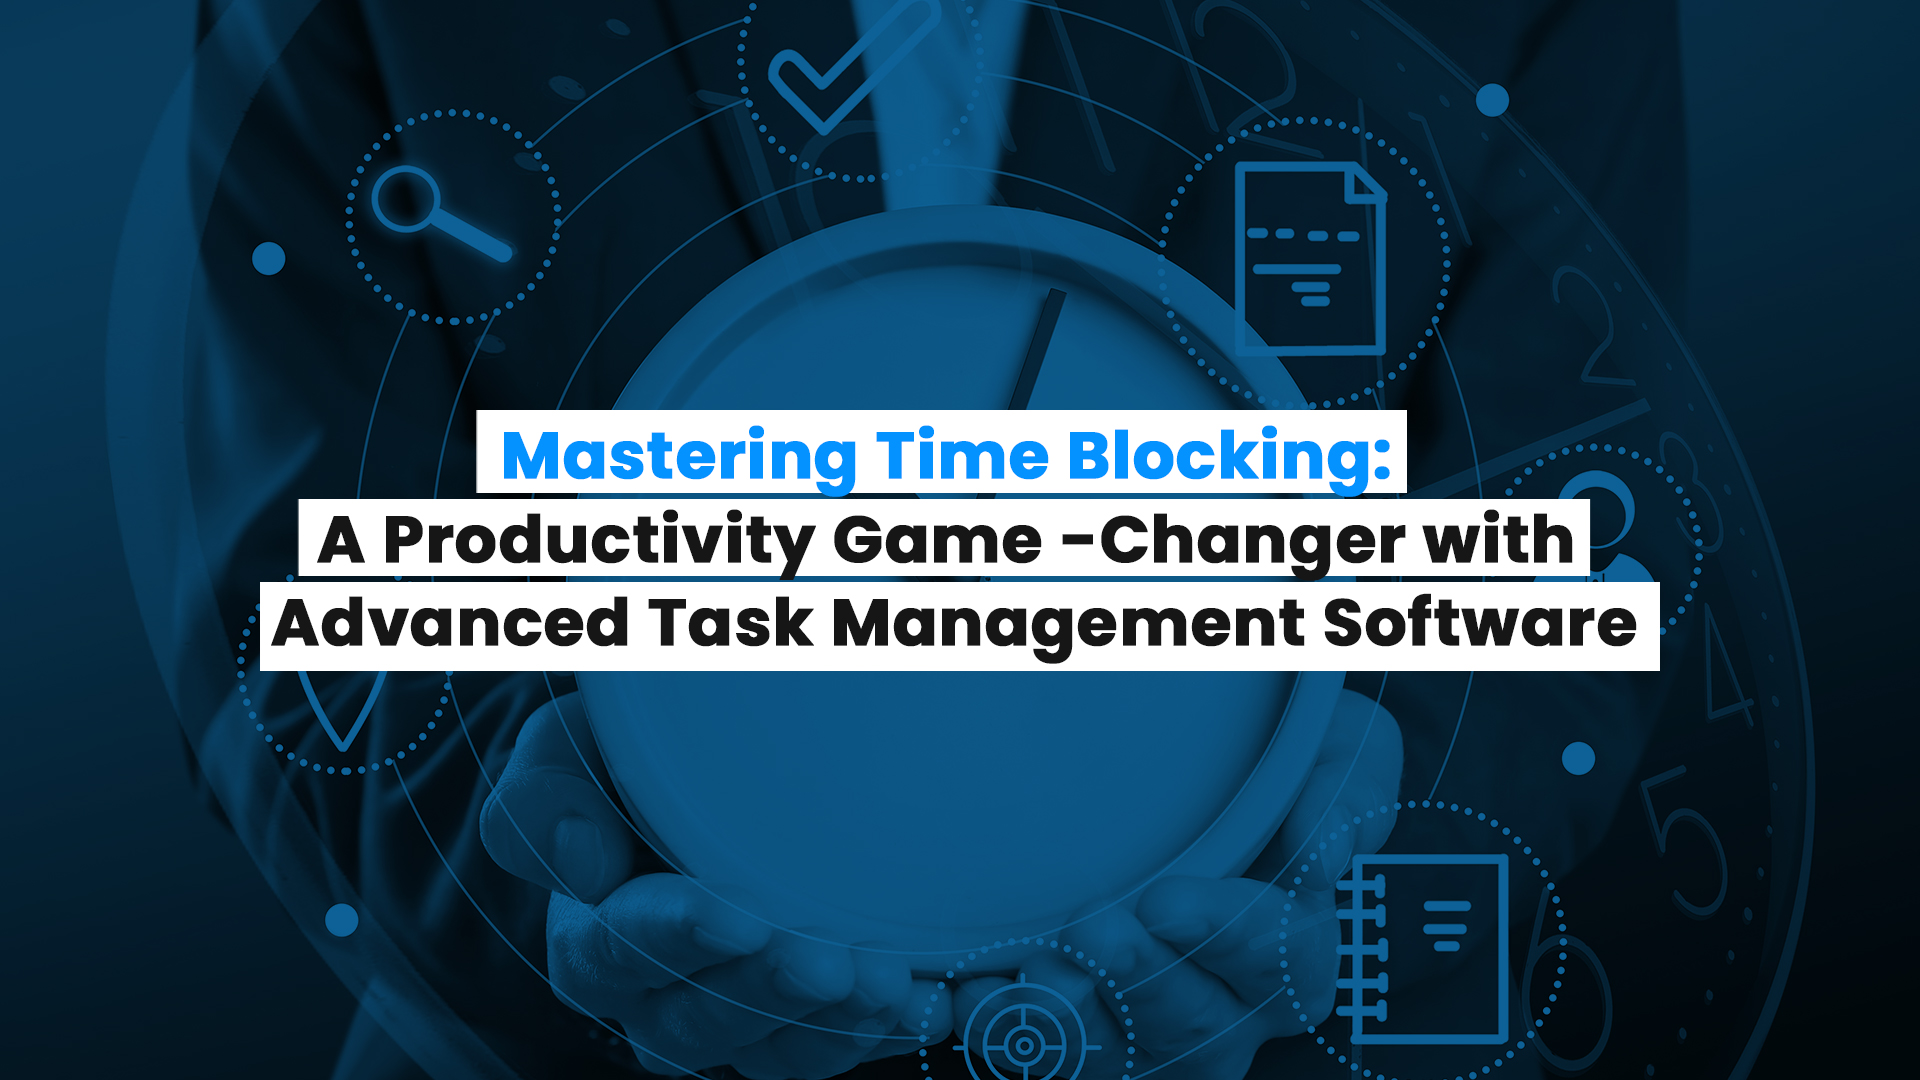 Mastering Time Blocking: A Productivity Game-Changer with Advanced Task Management Software